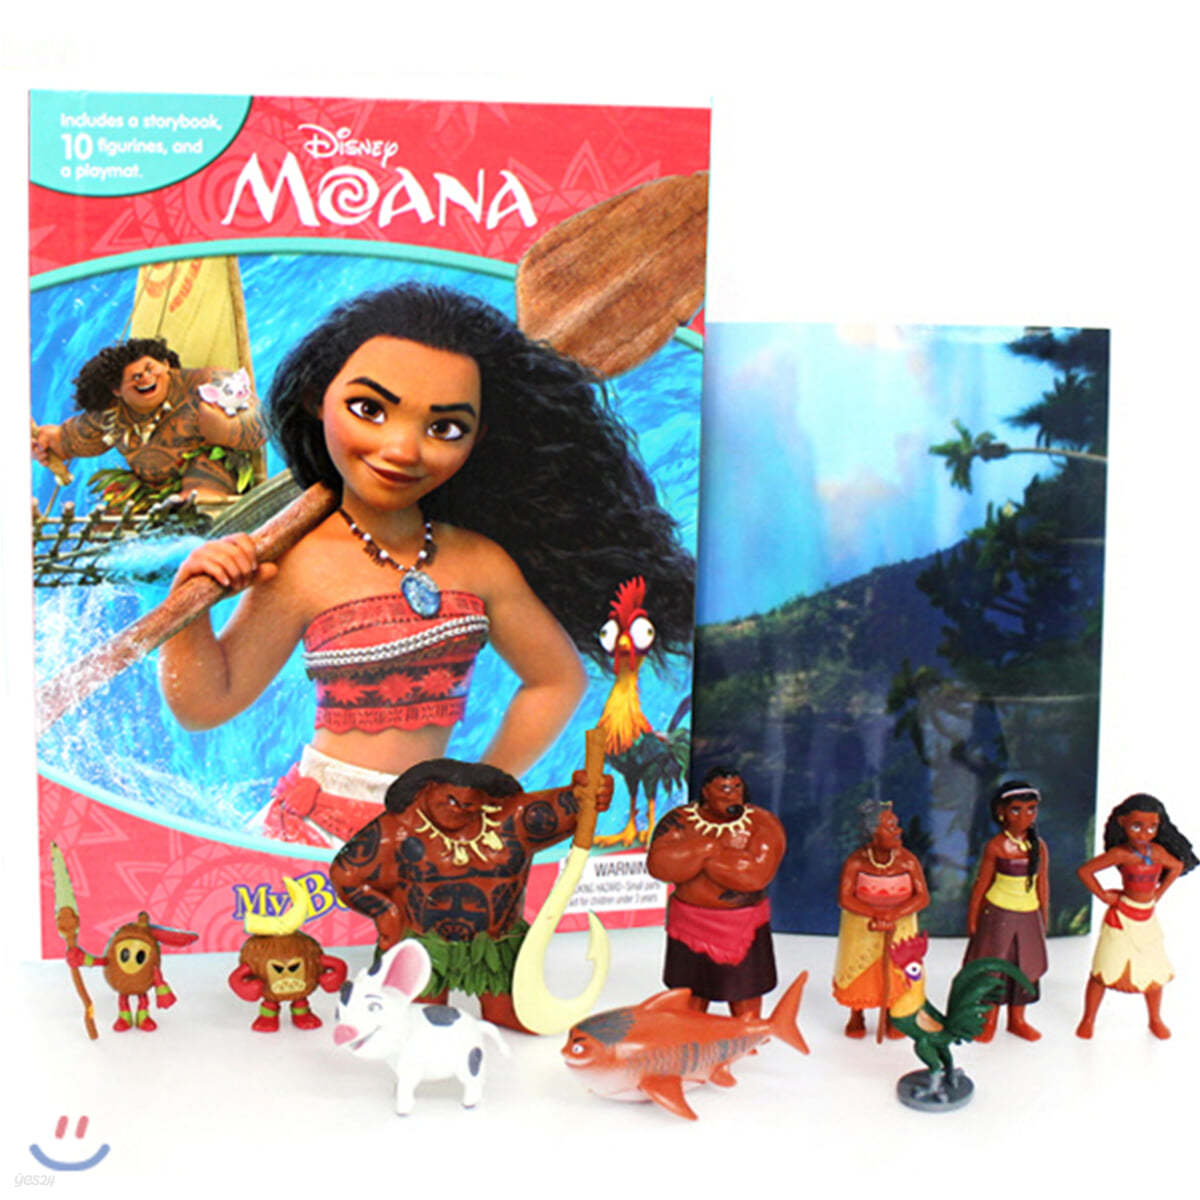 Moana coloring book for girls: moana coloring book age 2-12